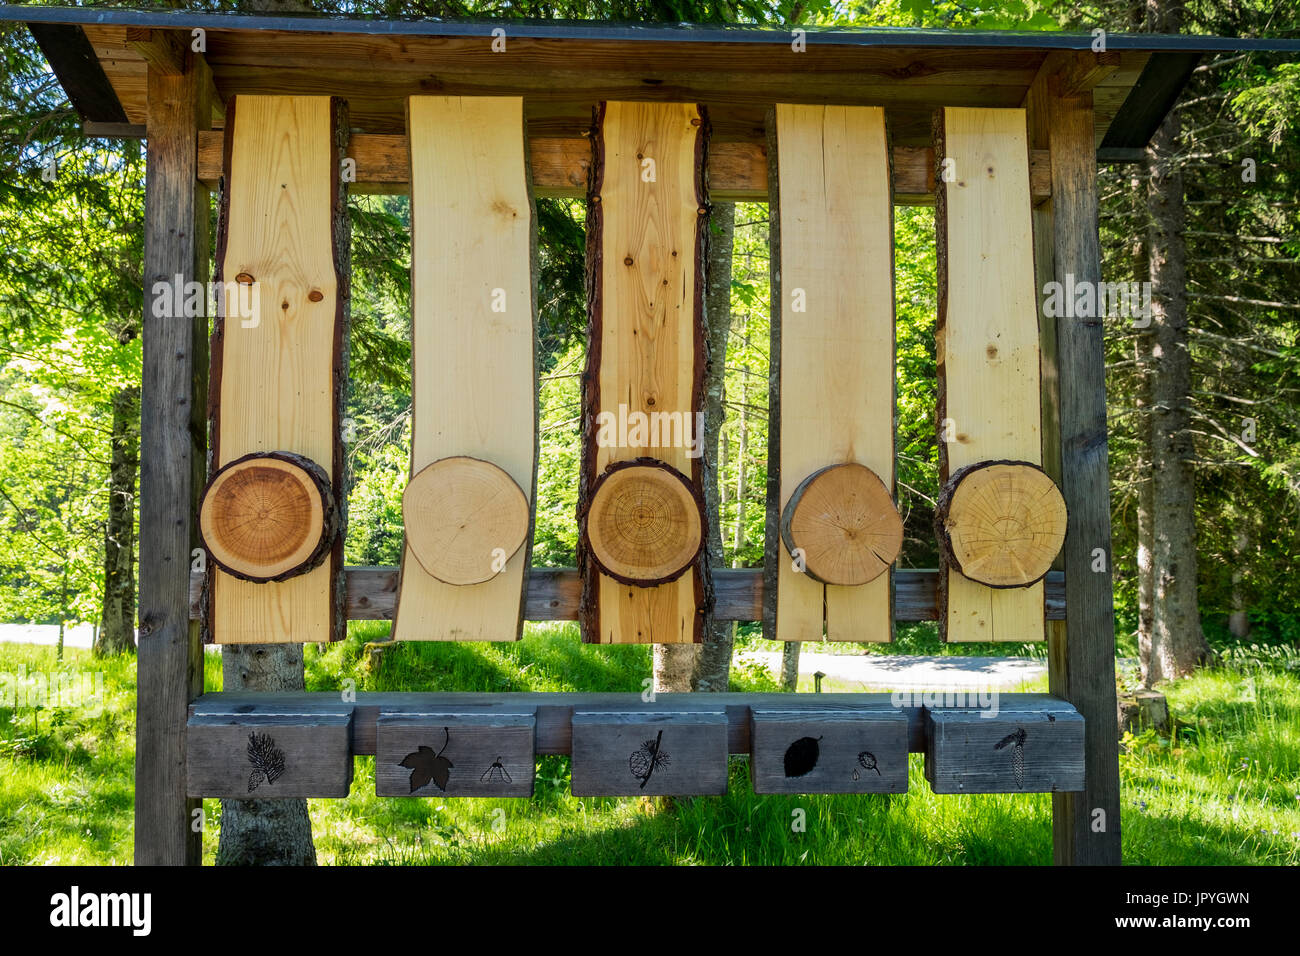 Educational display in forest showing cross section comparasion of different types of trees, Mittenwald, Bavaria, Germany Stock Photo